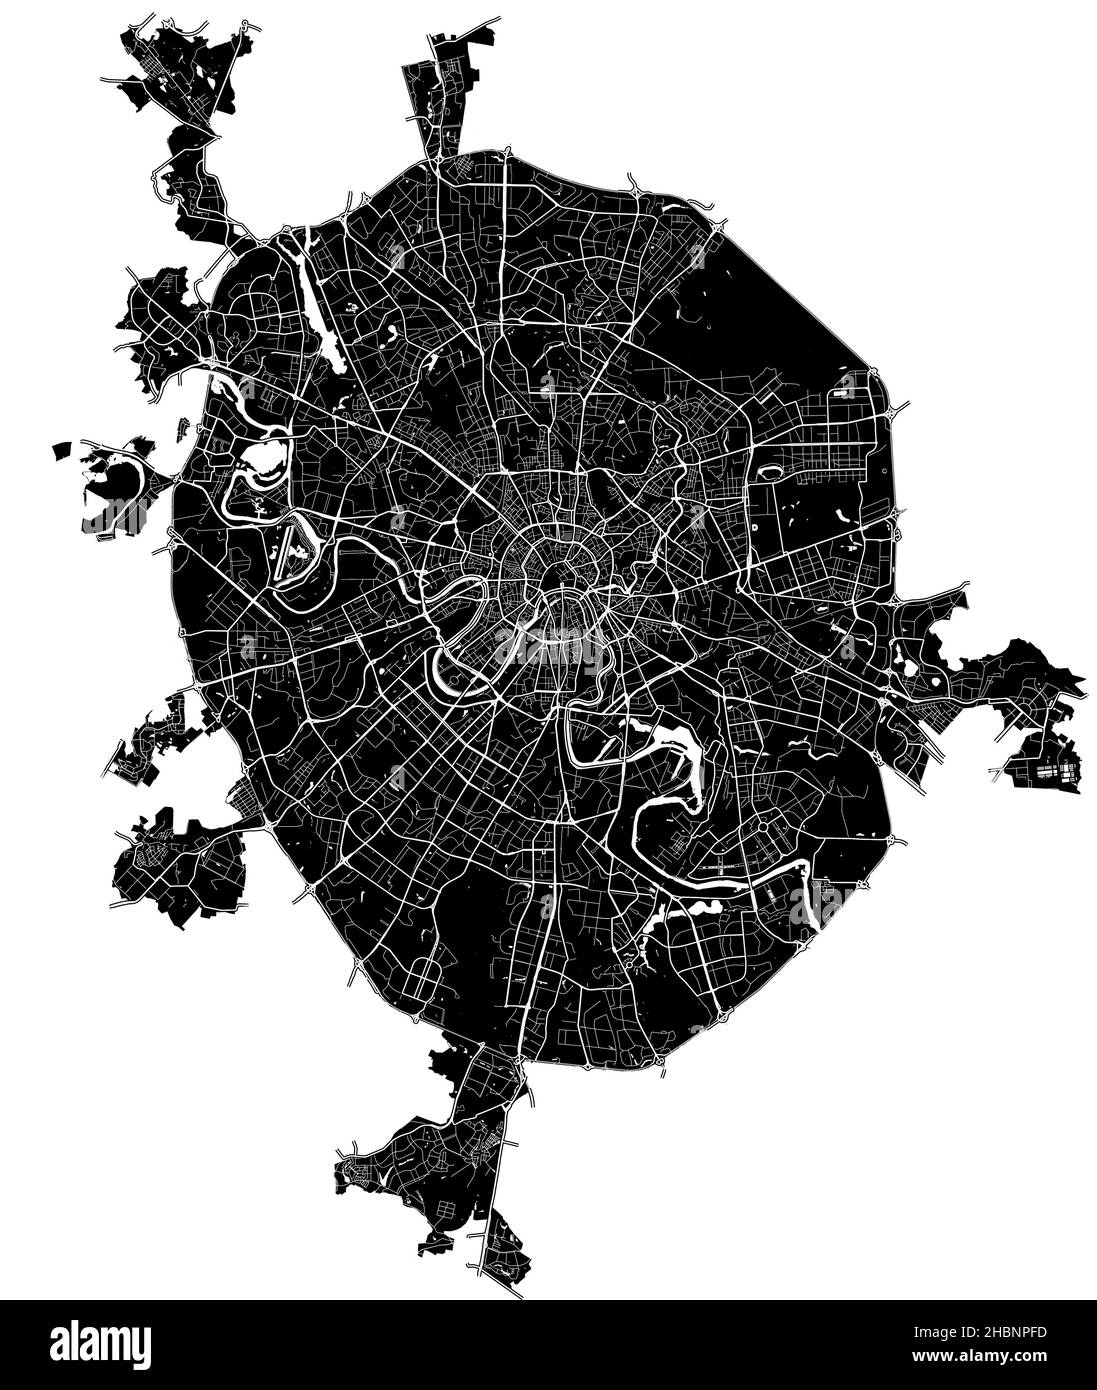 Moscow, Russia, high resolution vector map with city boundaries, and editable paths. The city map was drawn with white areas and lines for main roads, Stock Vector